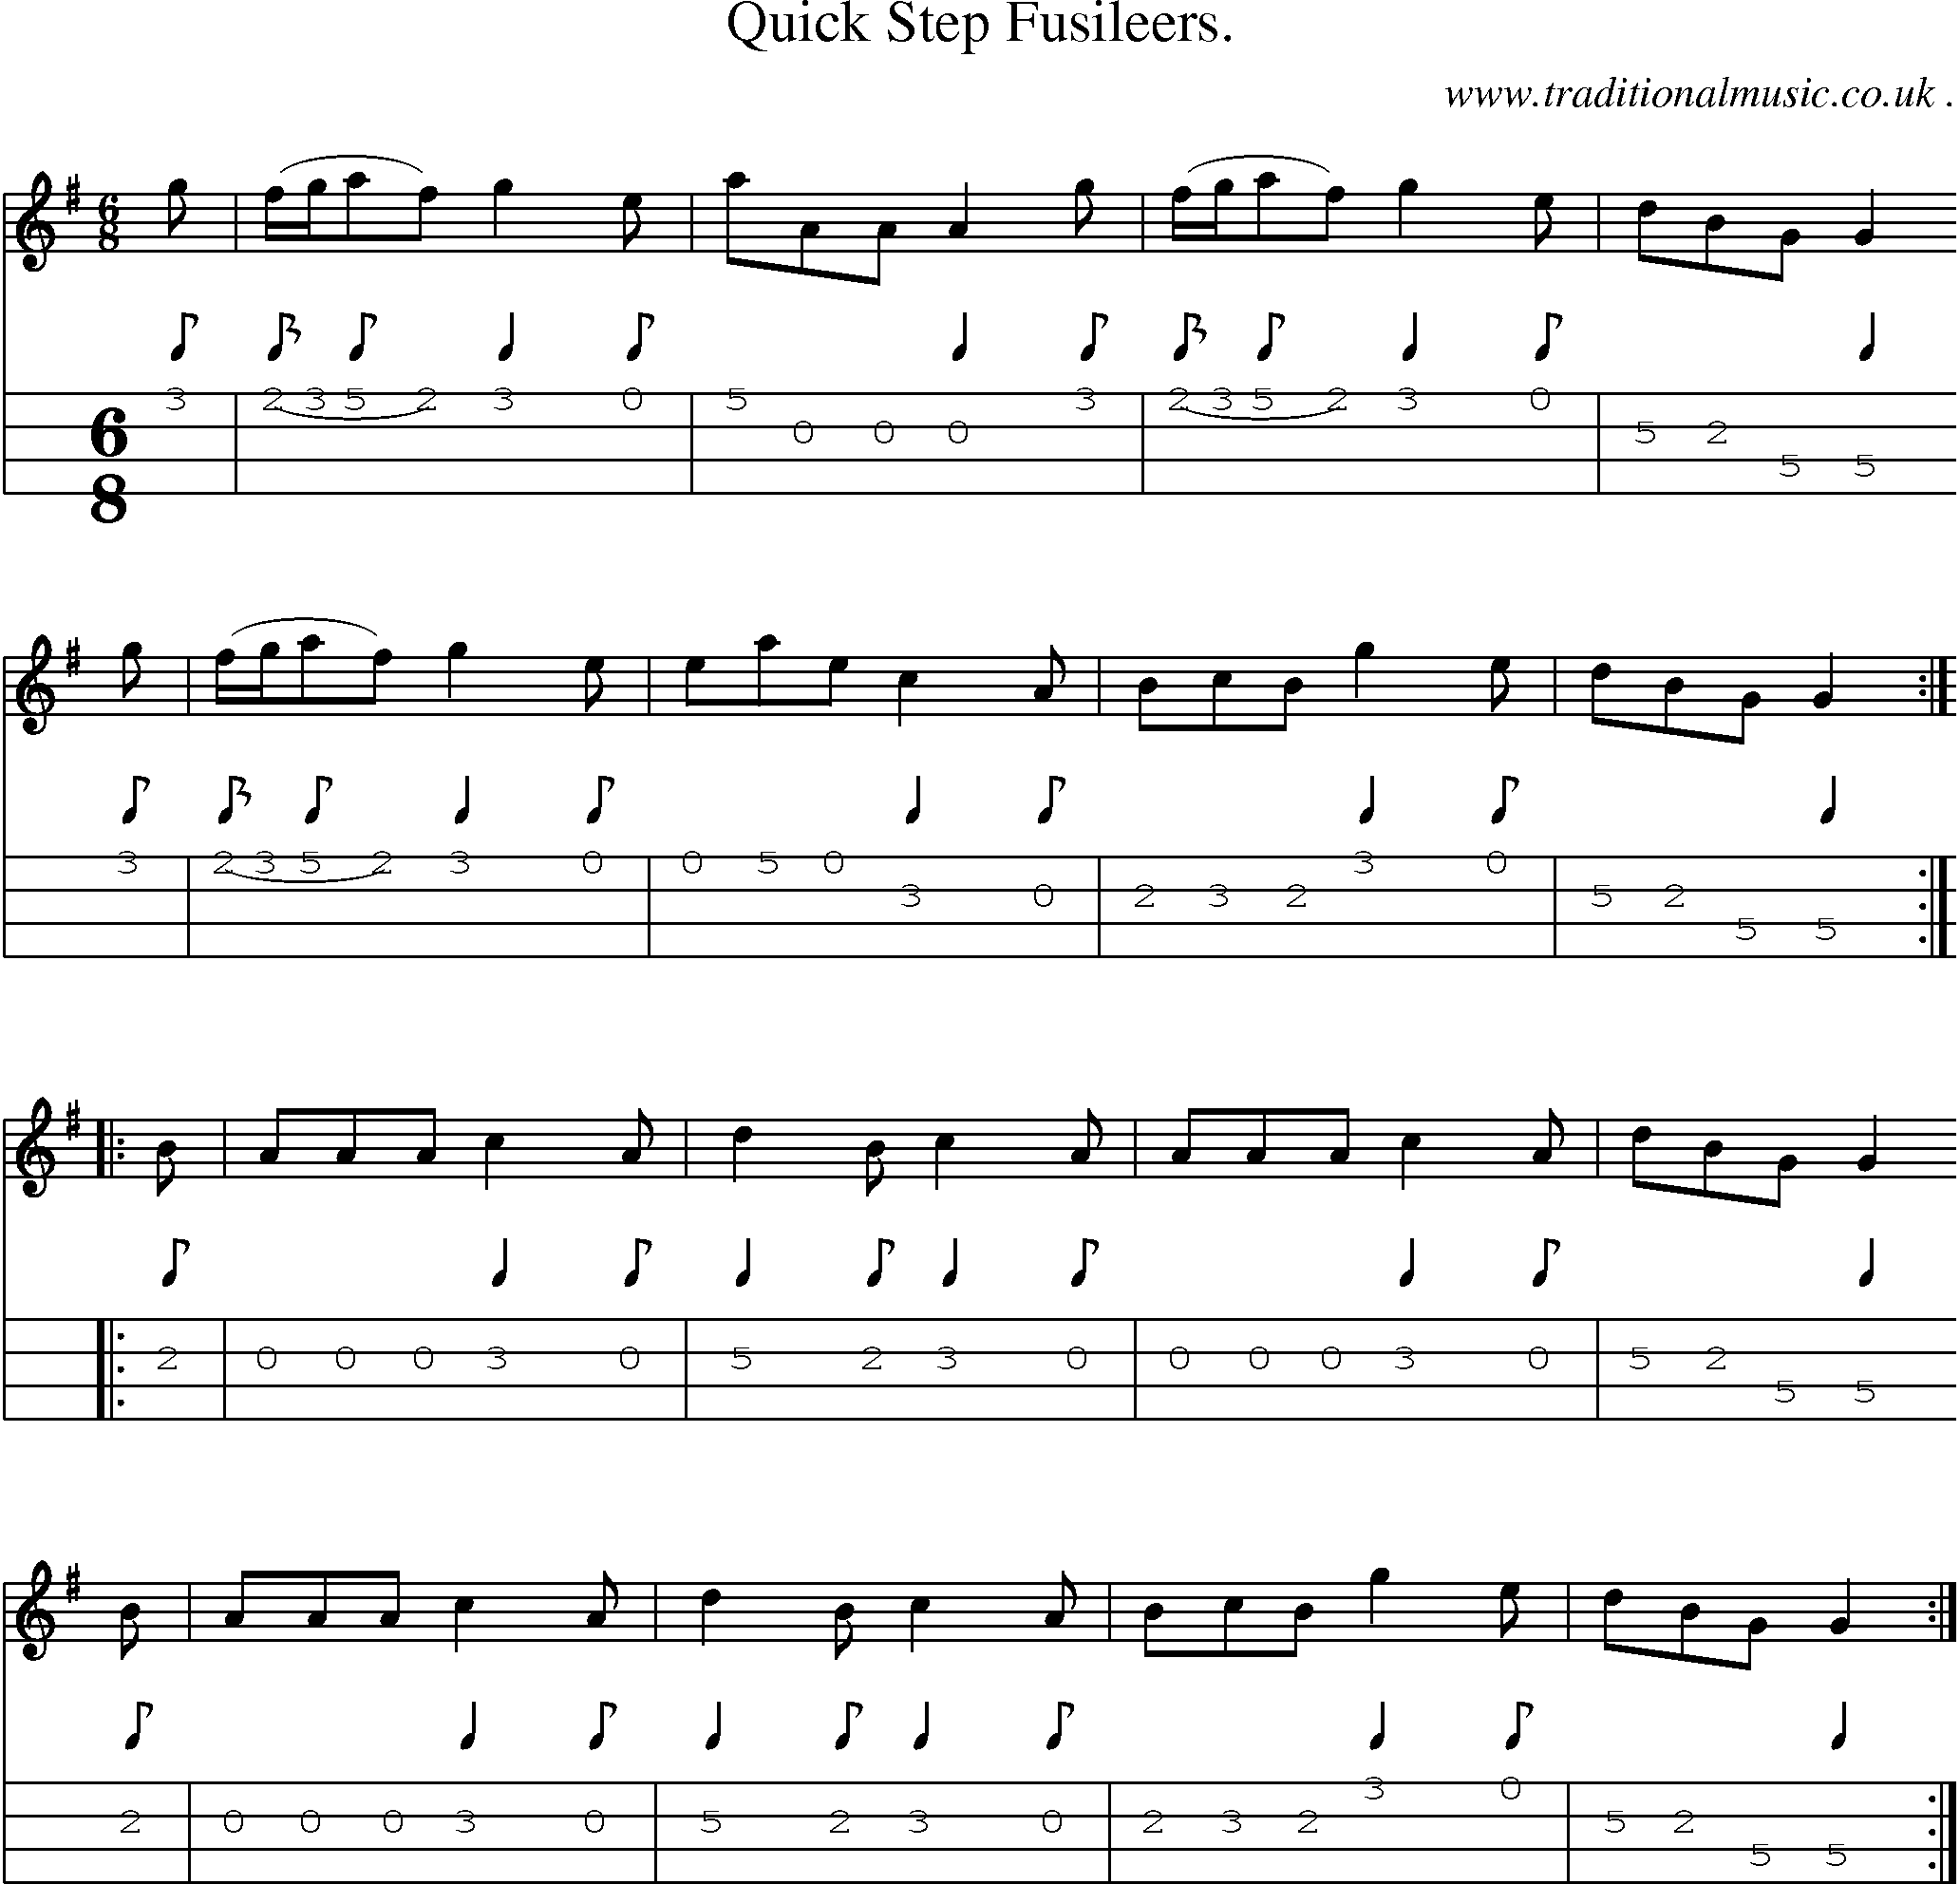 Sheet-Music and Mandolin Tabs for Quick Step Fusileers